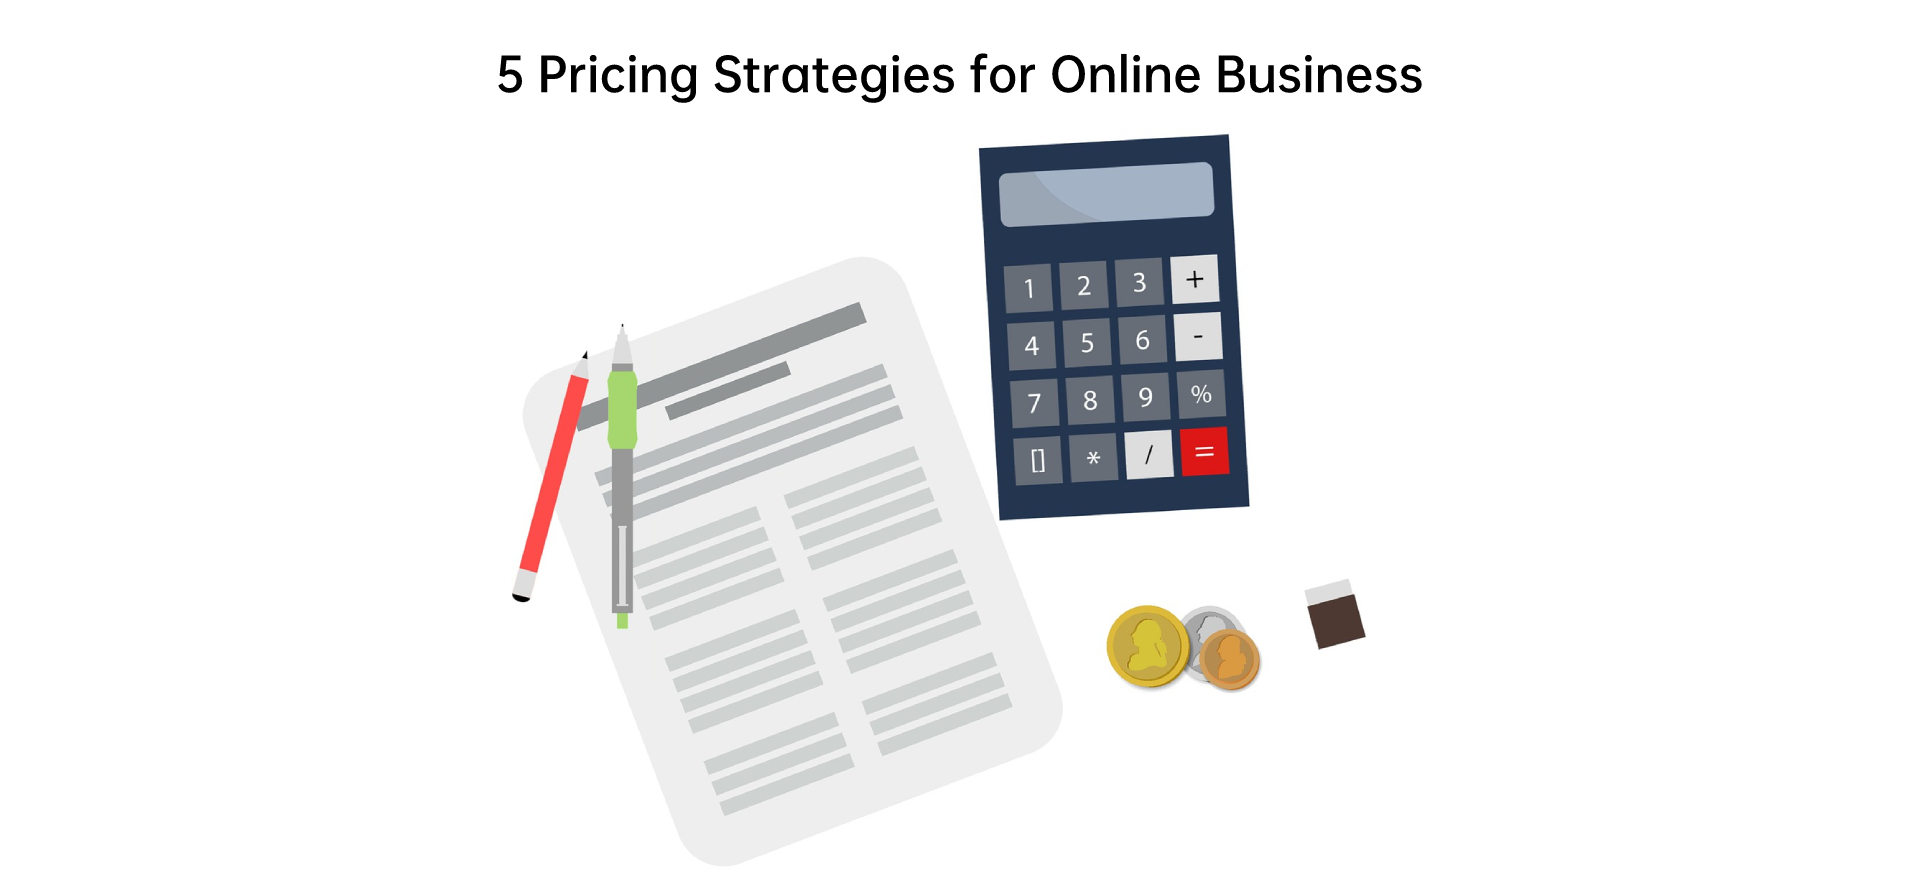 5 Pricing Strategies for Online Business